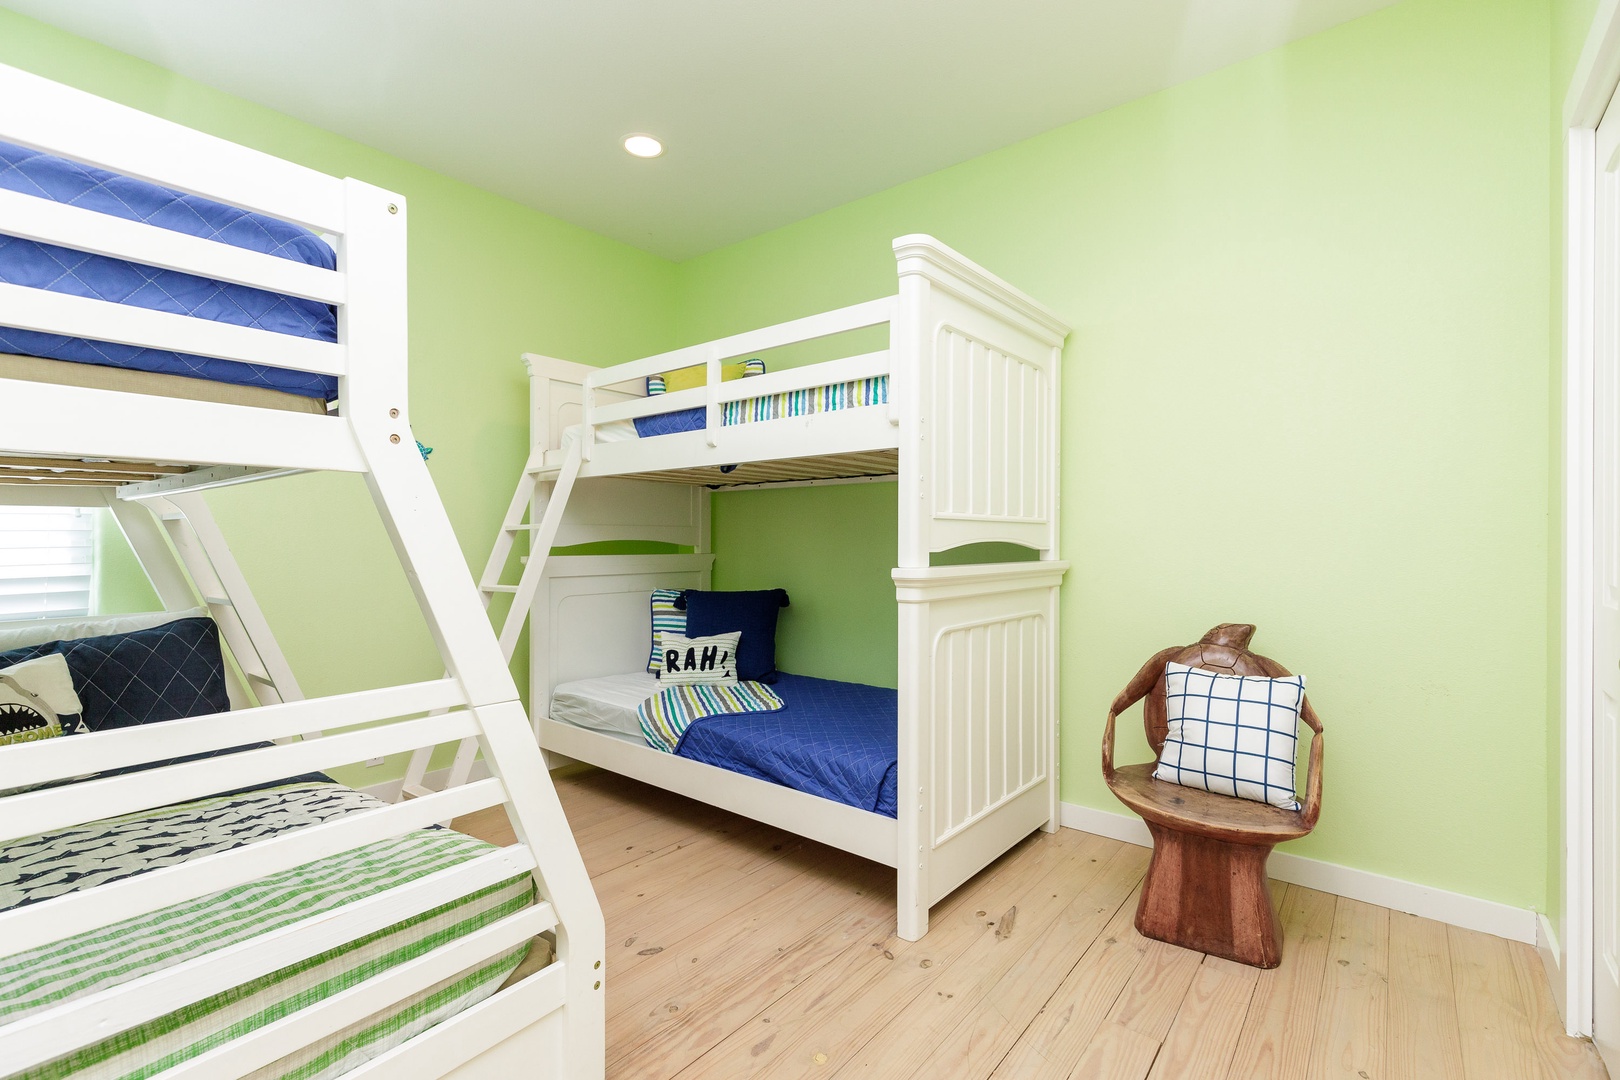 Bedroom #3 bunk beds (twin over twin and twin over full) with an attached en-suite bathroom